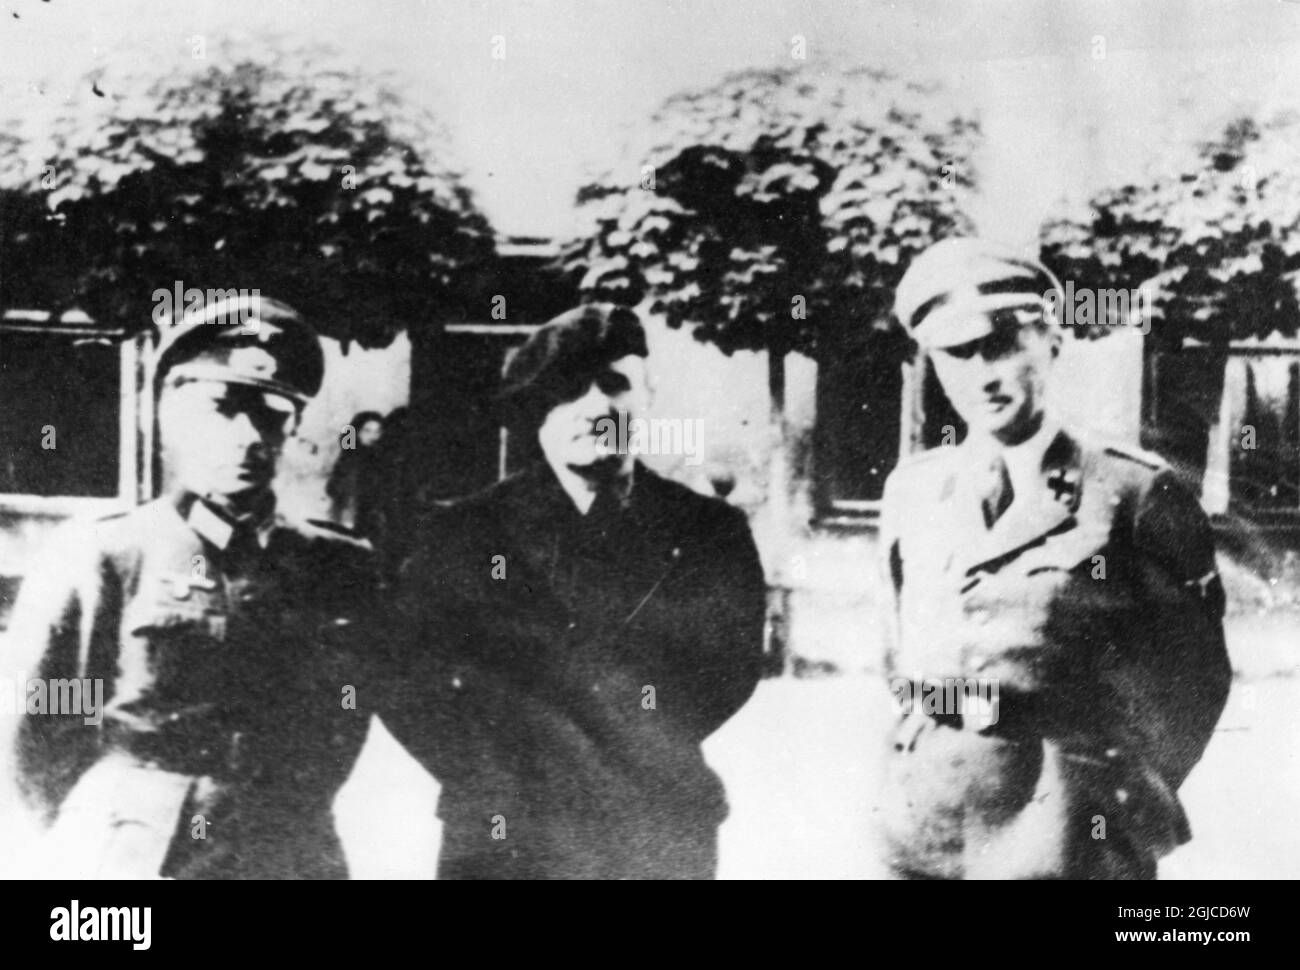 FRANCE 1944 Joseph Darnand, Secretary-General of the Vichy France militia and Secretary of State for maintenance of order during the last year of the Vichy regime, and a Major in the Waffen SS, flanked by German officers during the spring of 1944 in Vichy France.n. Photo: AB Text & Bilder / SVT / Kod: 5600  Stock Photo